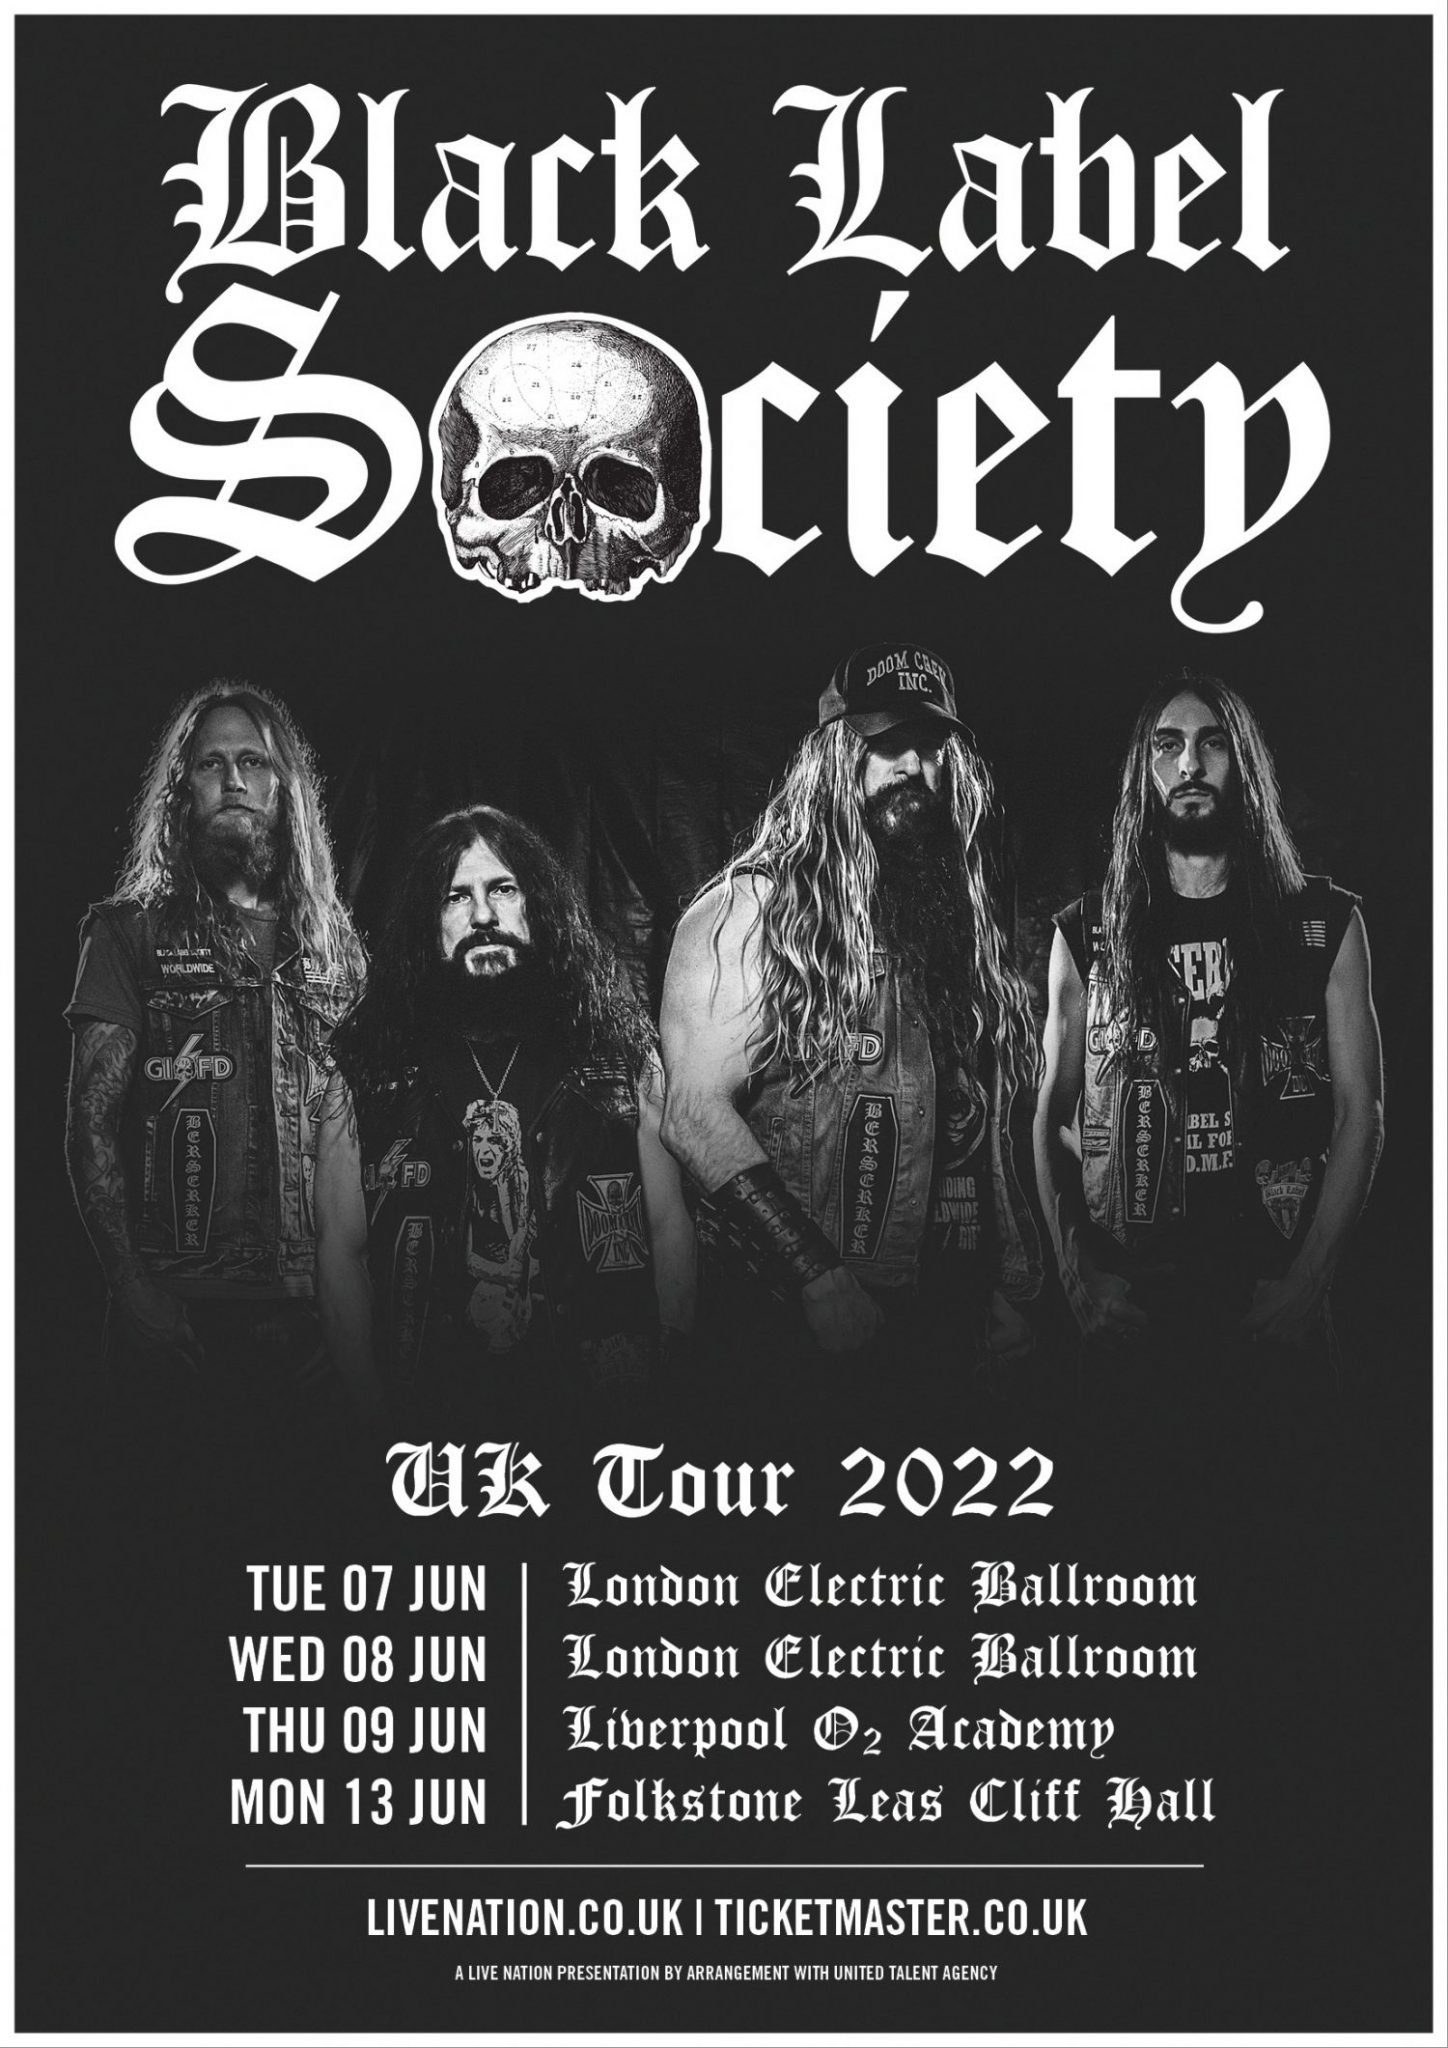 Black label society rust текст фото 21